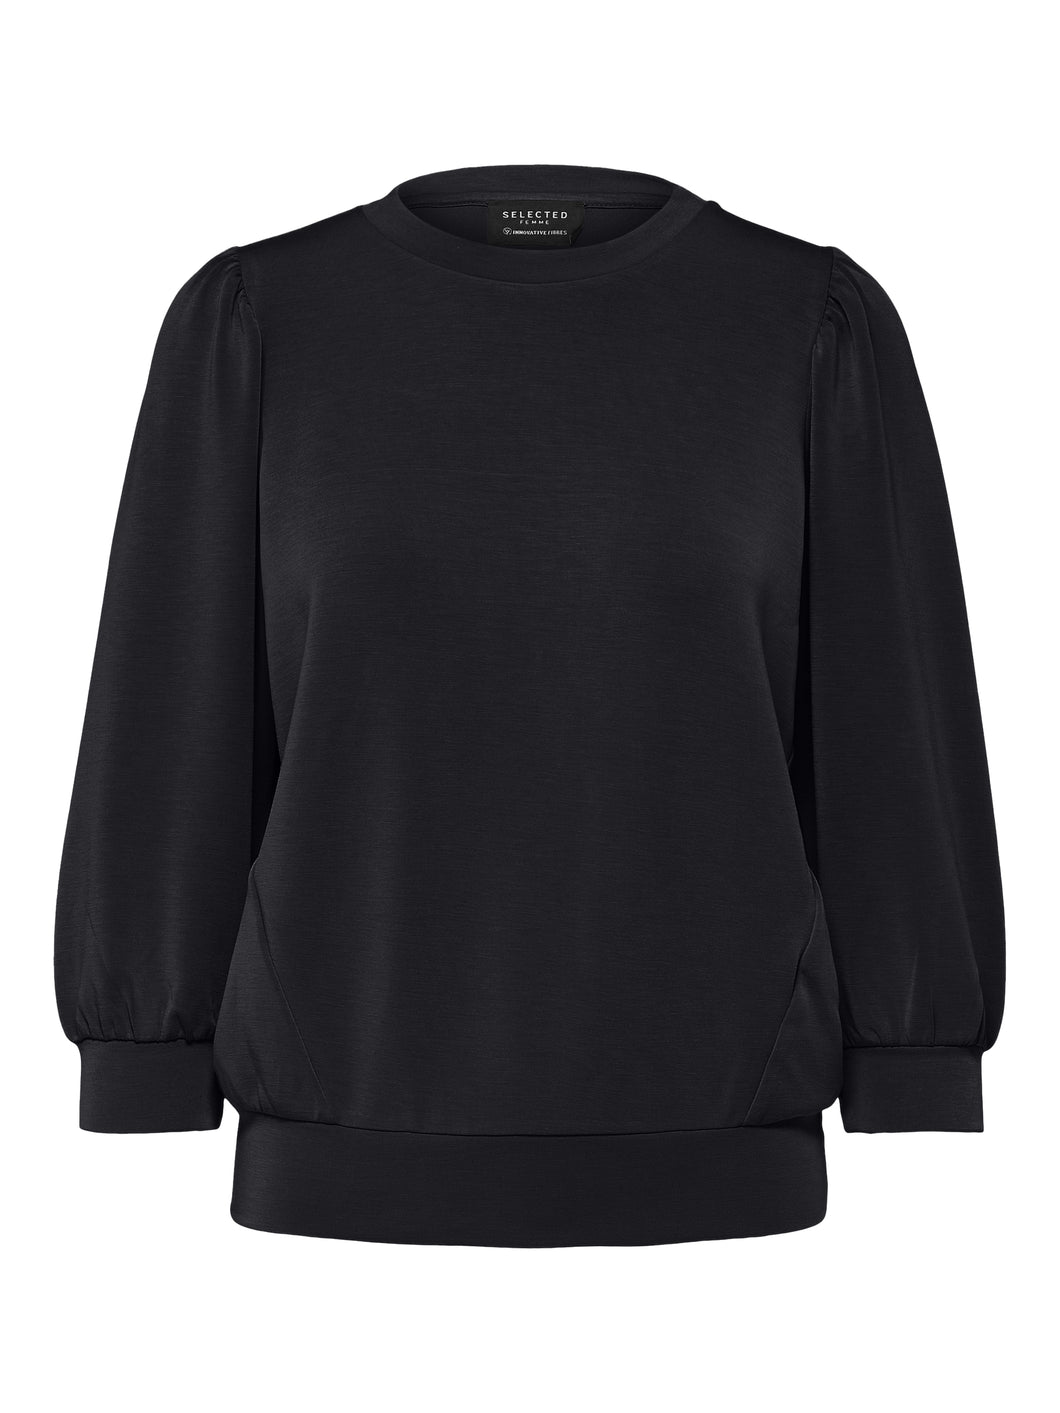 SELECTED SLFTenny 3/4 Sweat Top Black